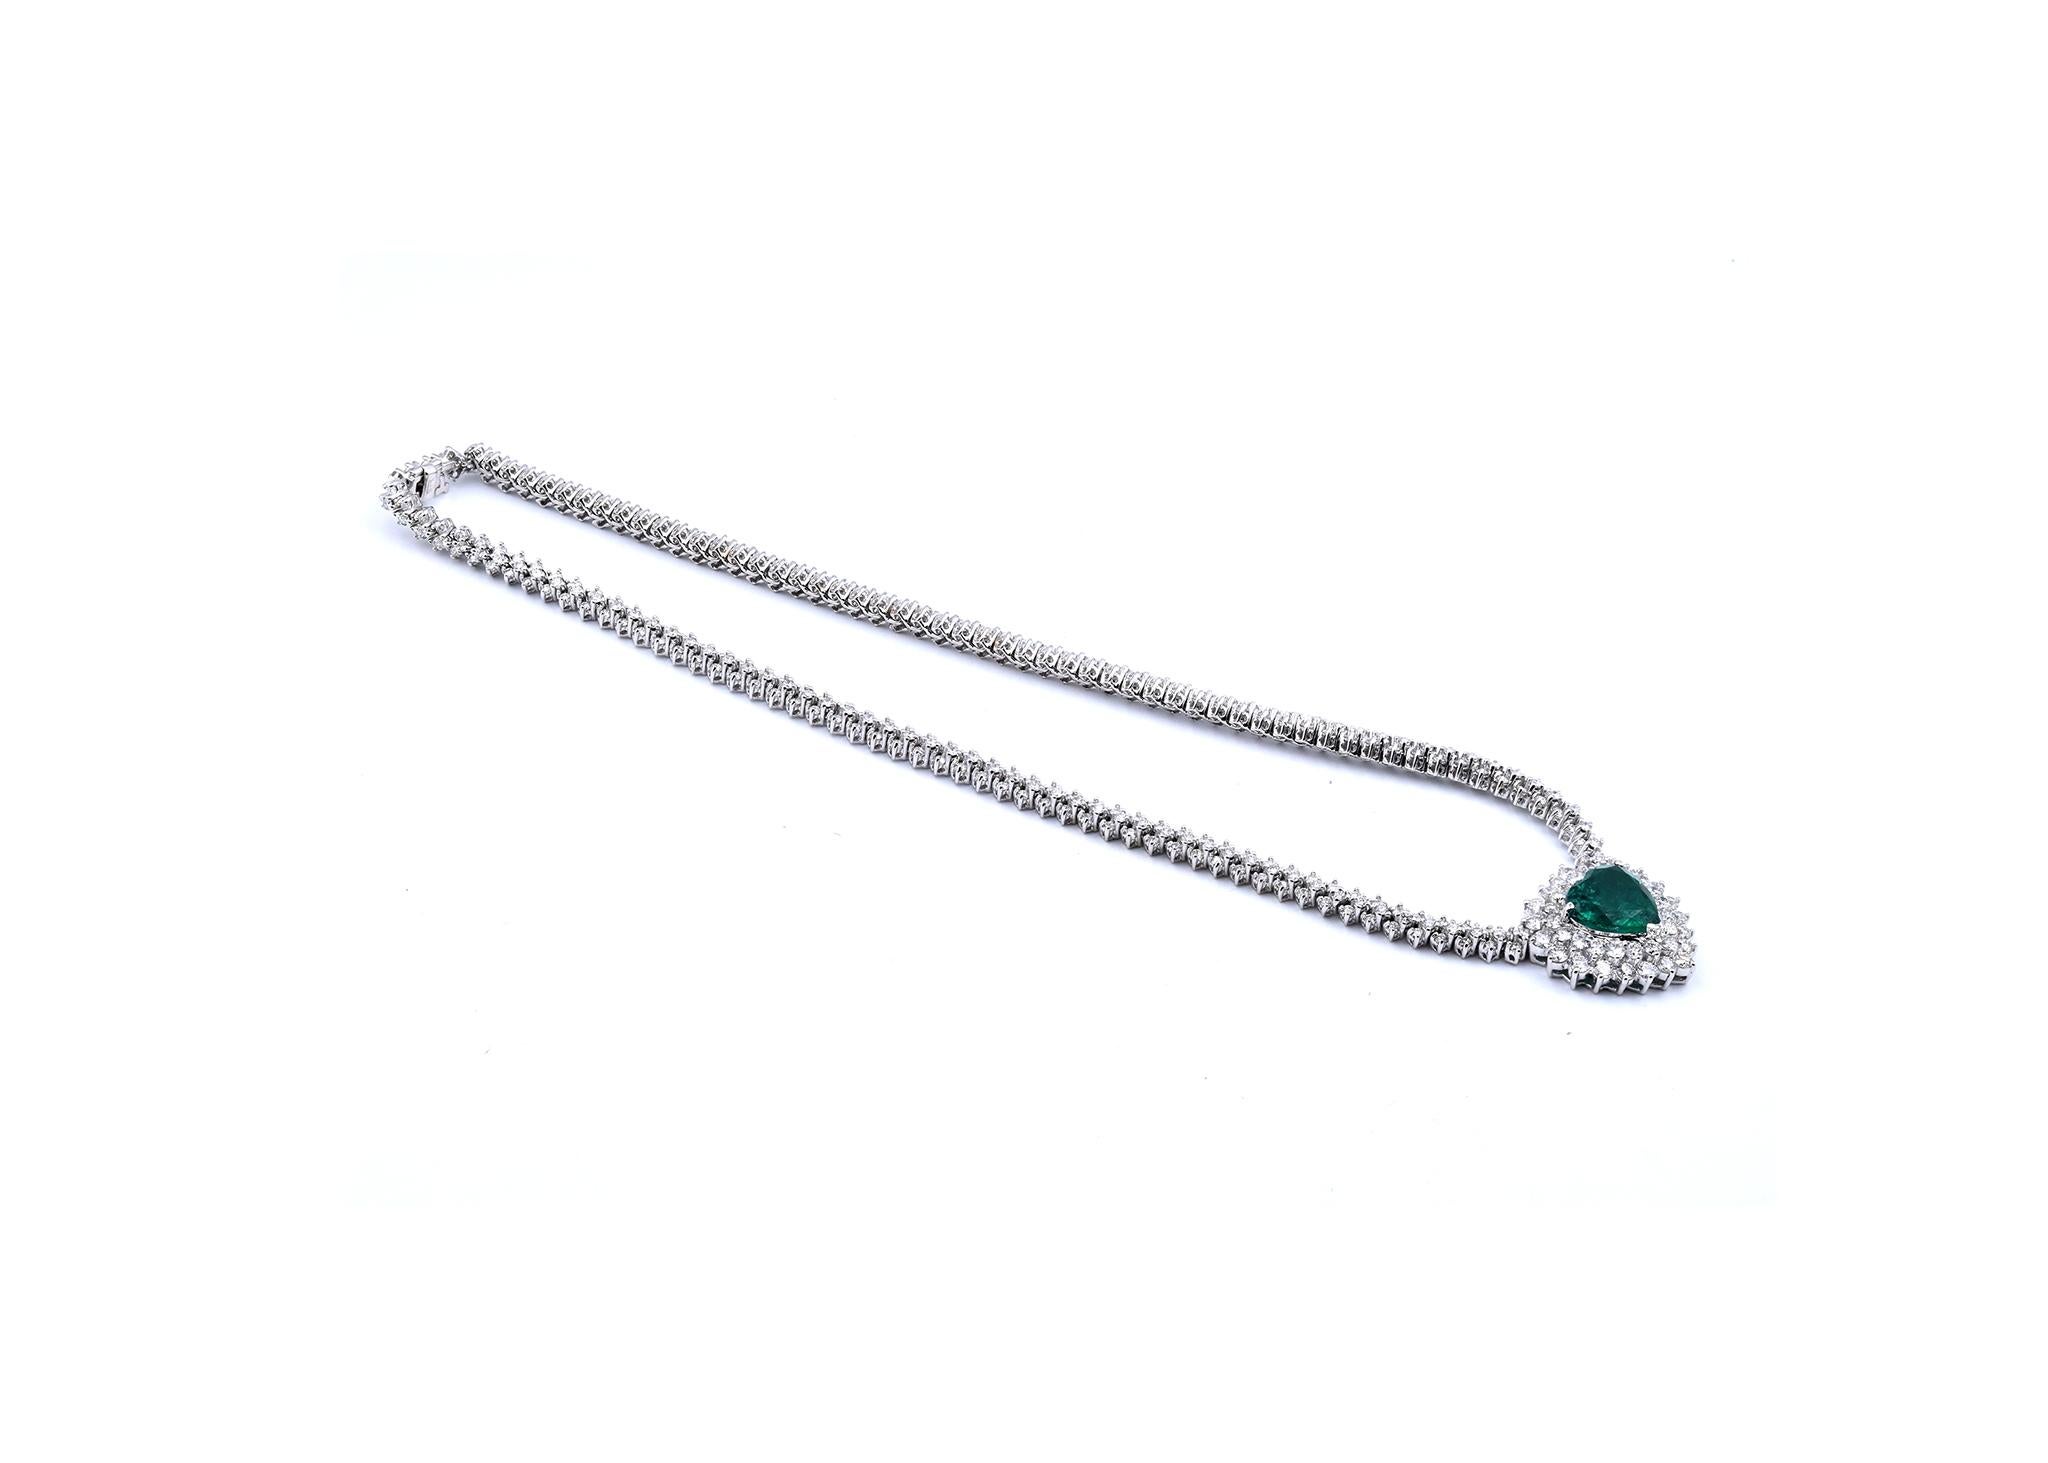 Material: 18K white gold
Diamonds: 396 round brilliant cut = 14.25cttw
Color: G
Clarity: VVS1-2
Emerald: 1 heart cut = 7.36ct
Color: highly saturated deep Kelly green 
Clarity: AAA
Dimensions: necklace measures 18-inches, pendant measures 51.5 X